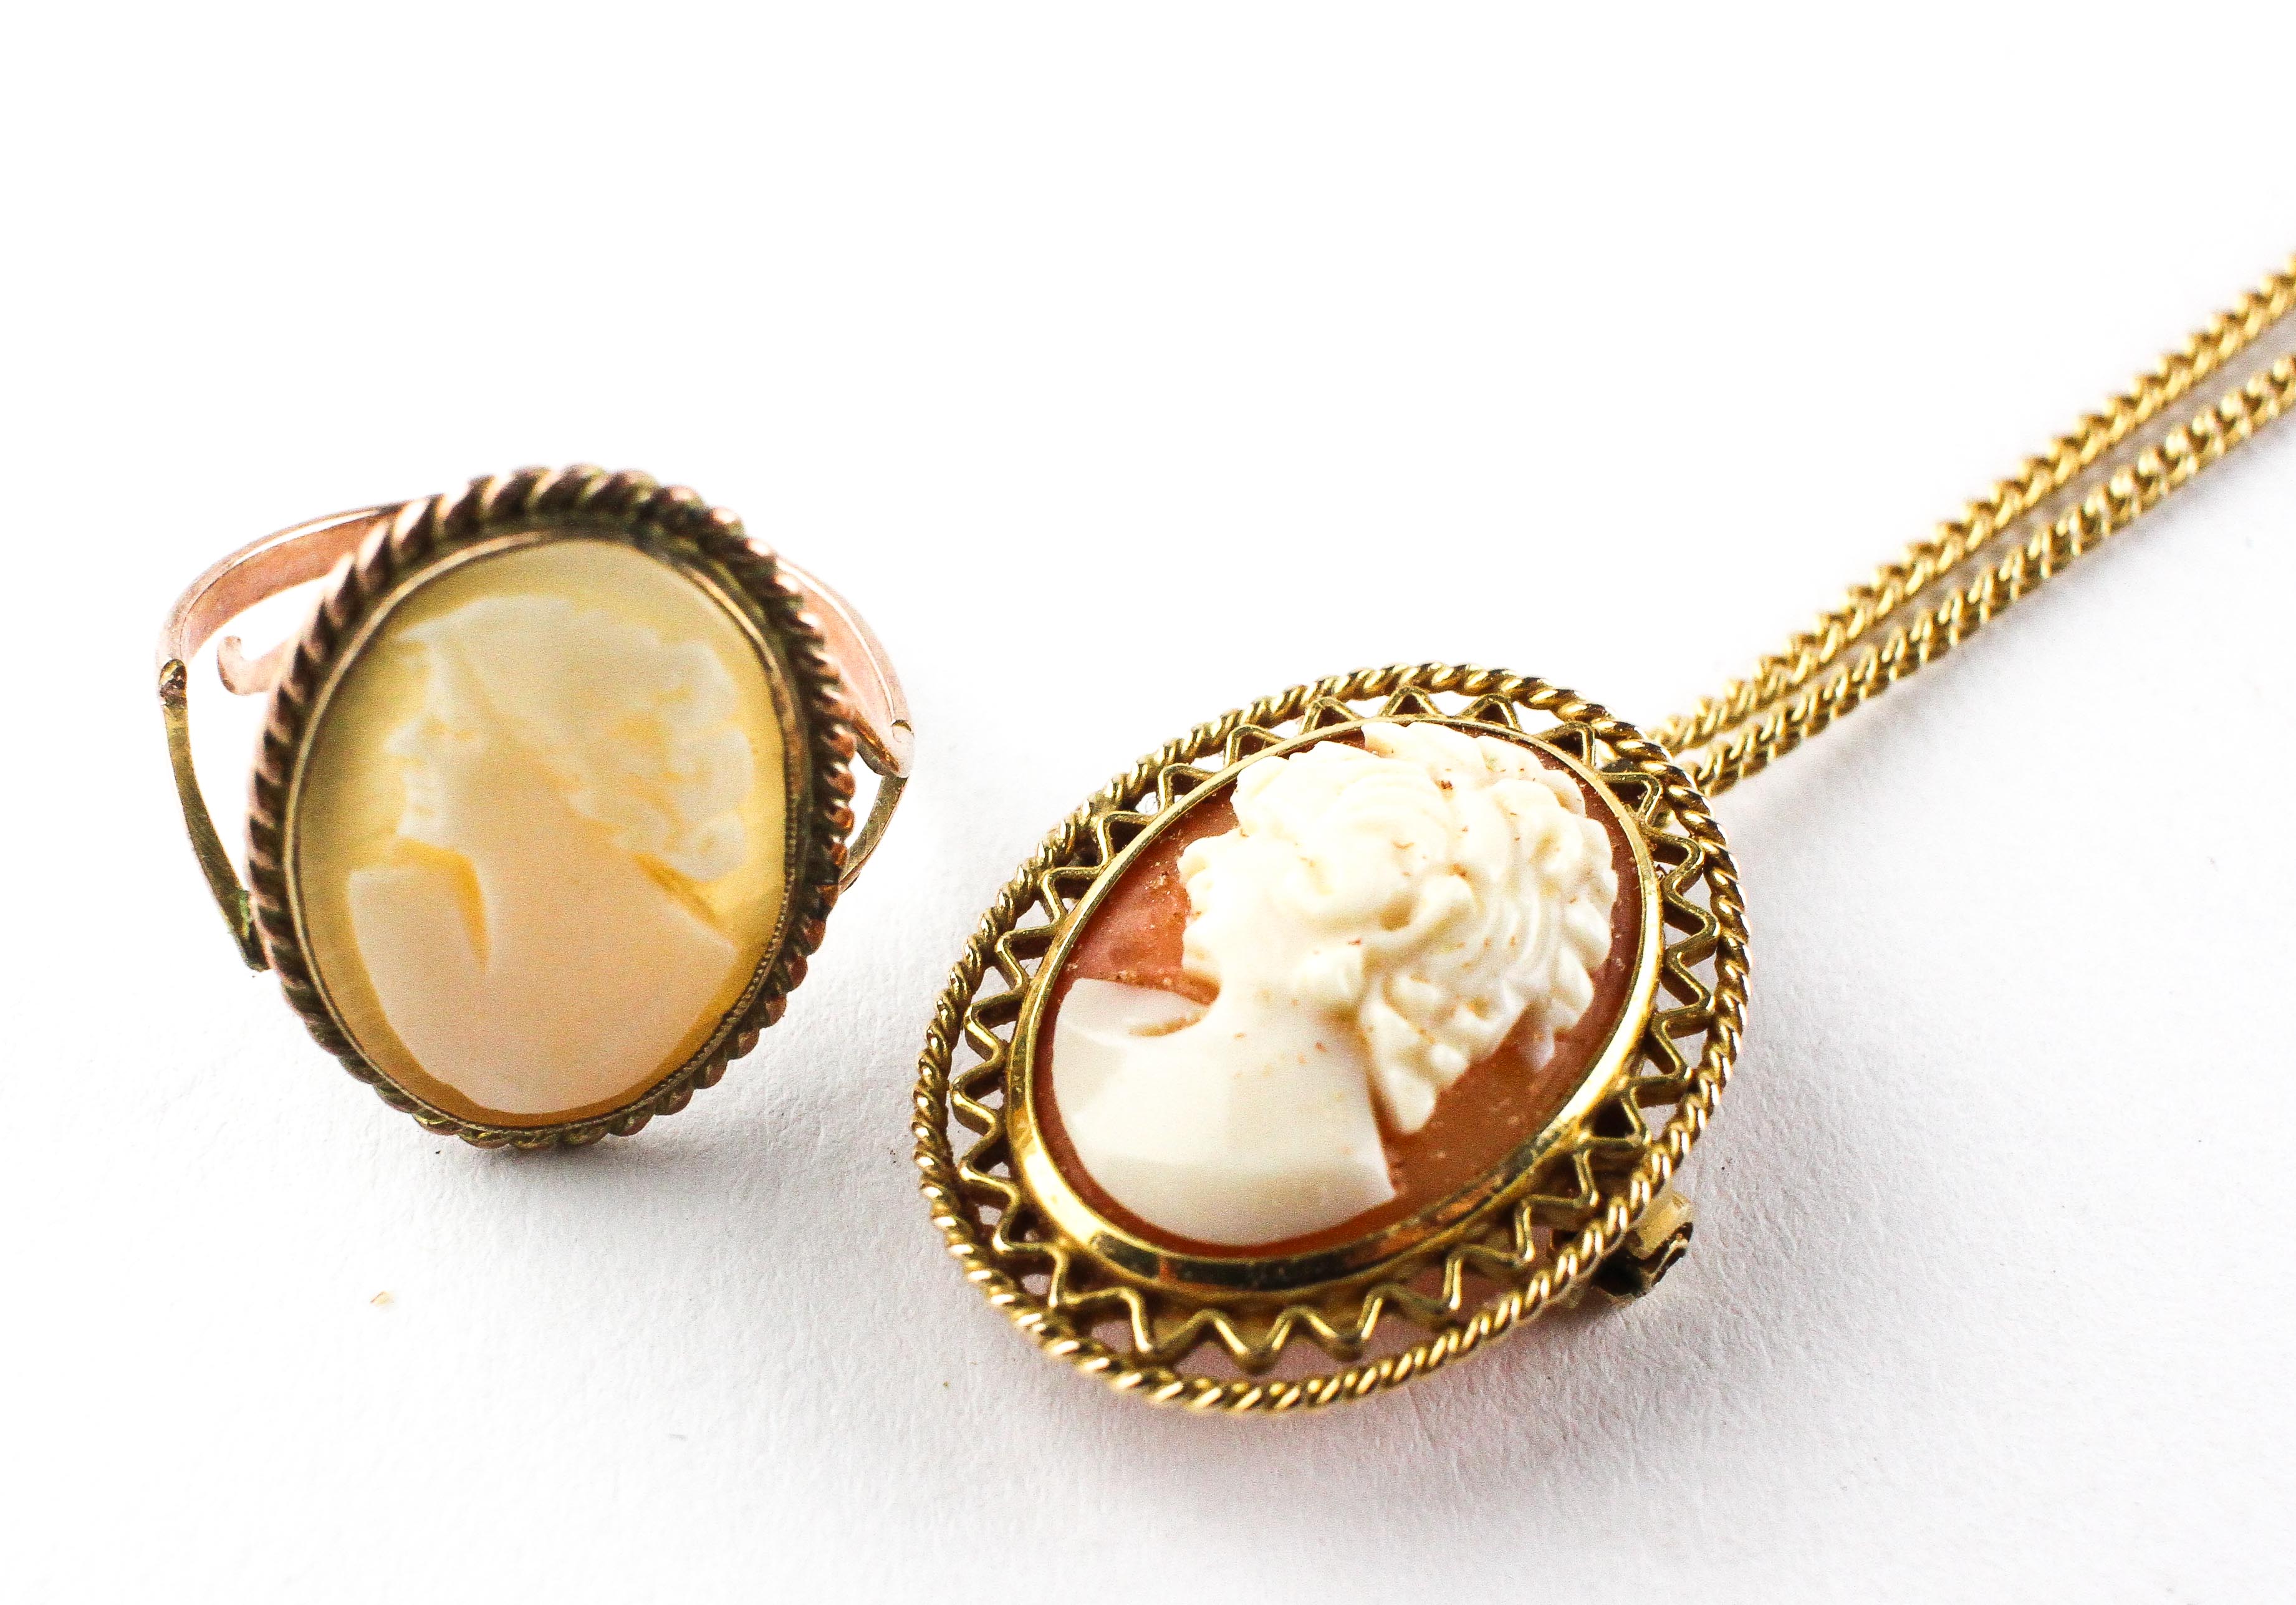 A yellow metal cameo brooch/pendant suspended from a 22 inch curb chain, - Image 2 of 3